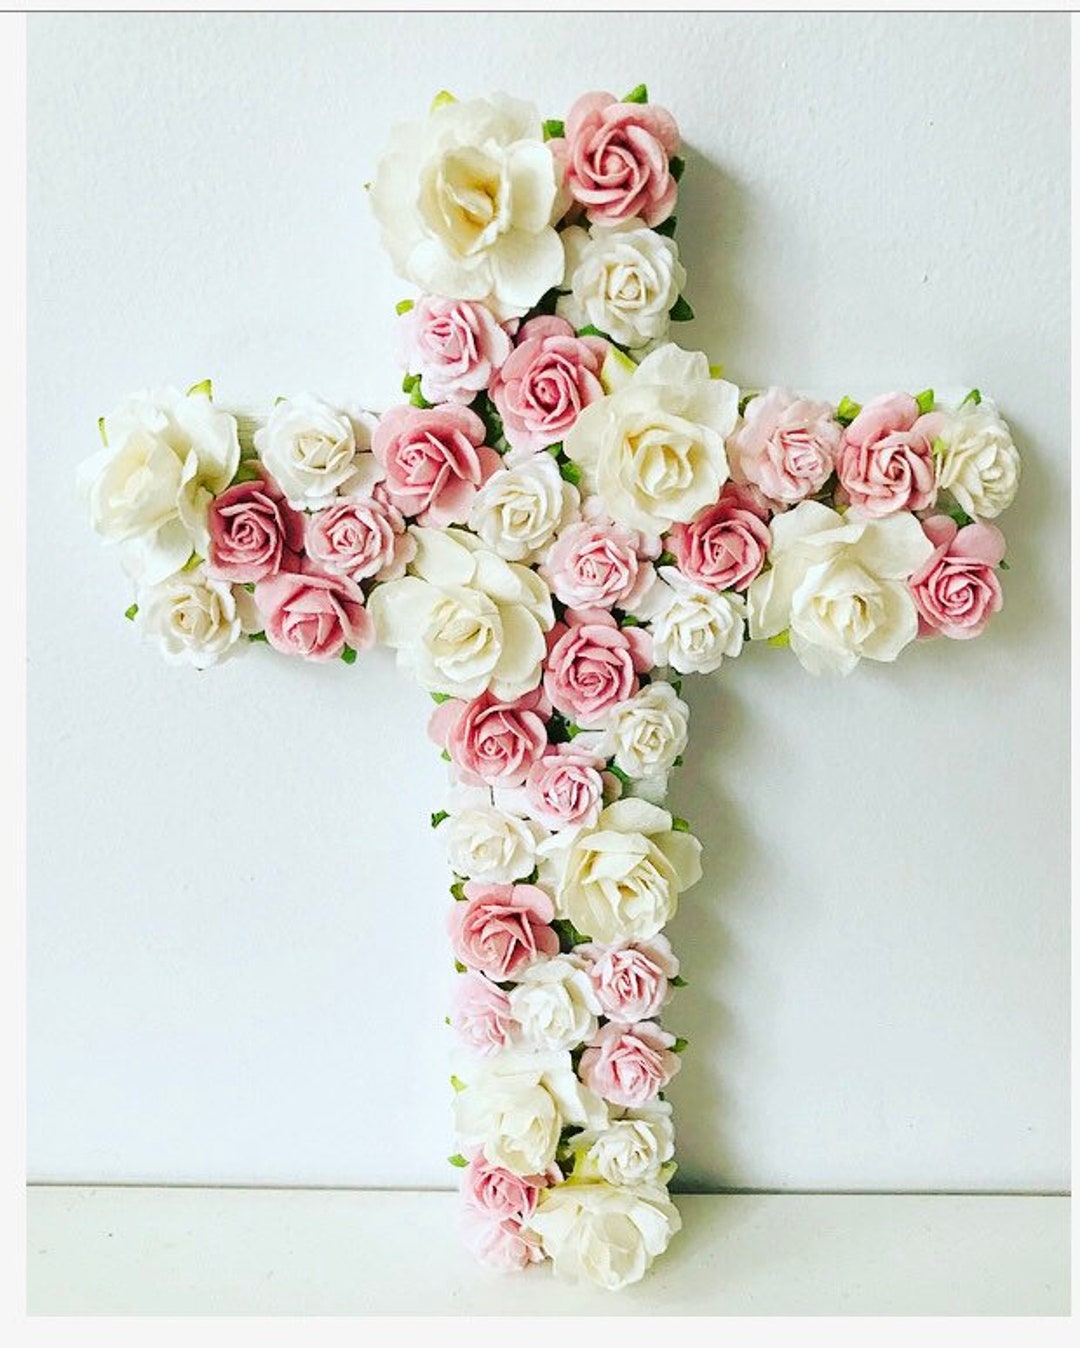 Kigley 12 Pcs Standing Wooden Cross 3 Style Wood Crosses for Crafts with  Bases 24 White Roses Artificial Flowers with Leaf First Communion Baptism